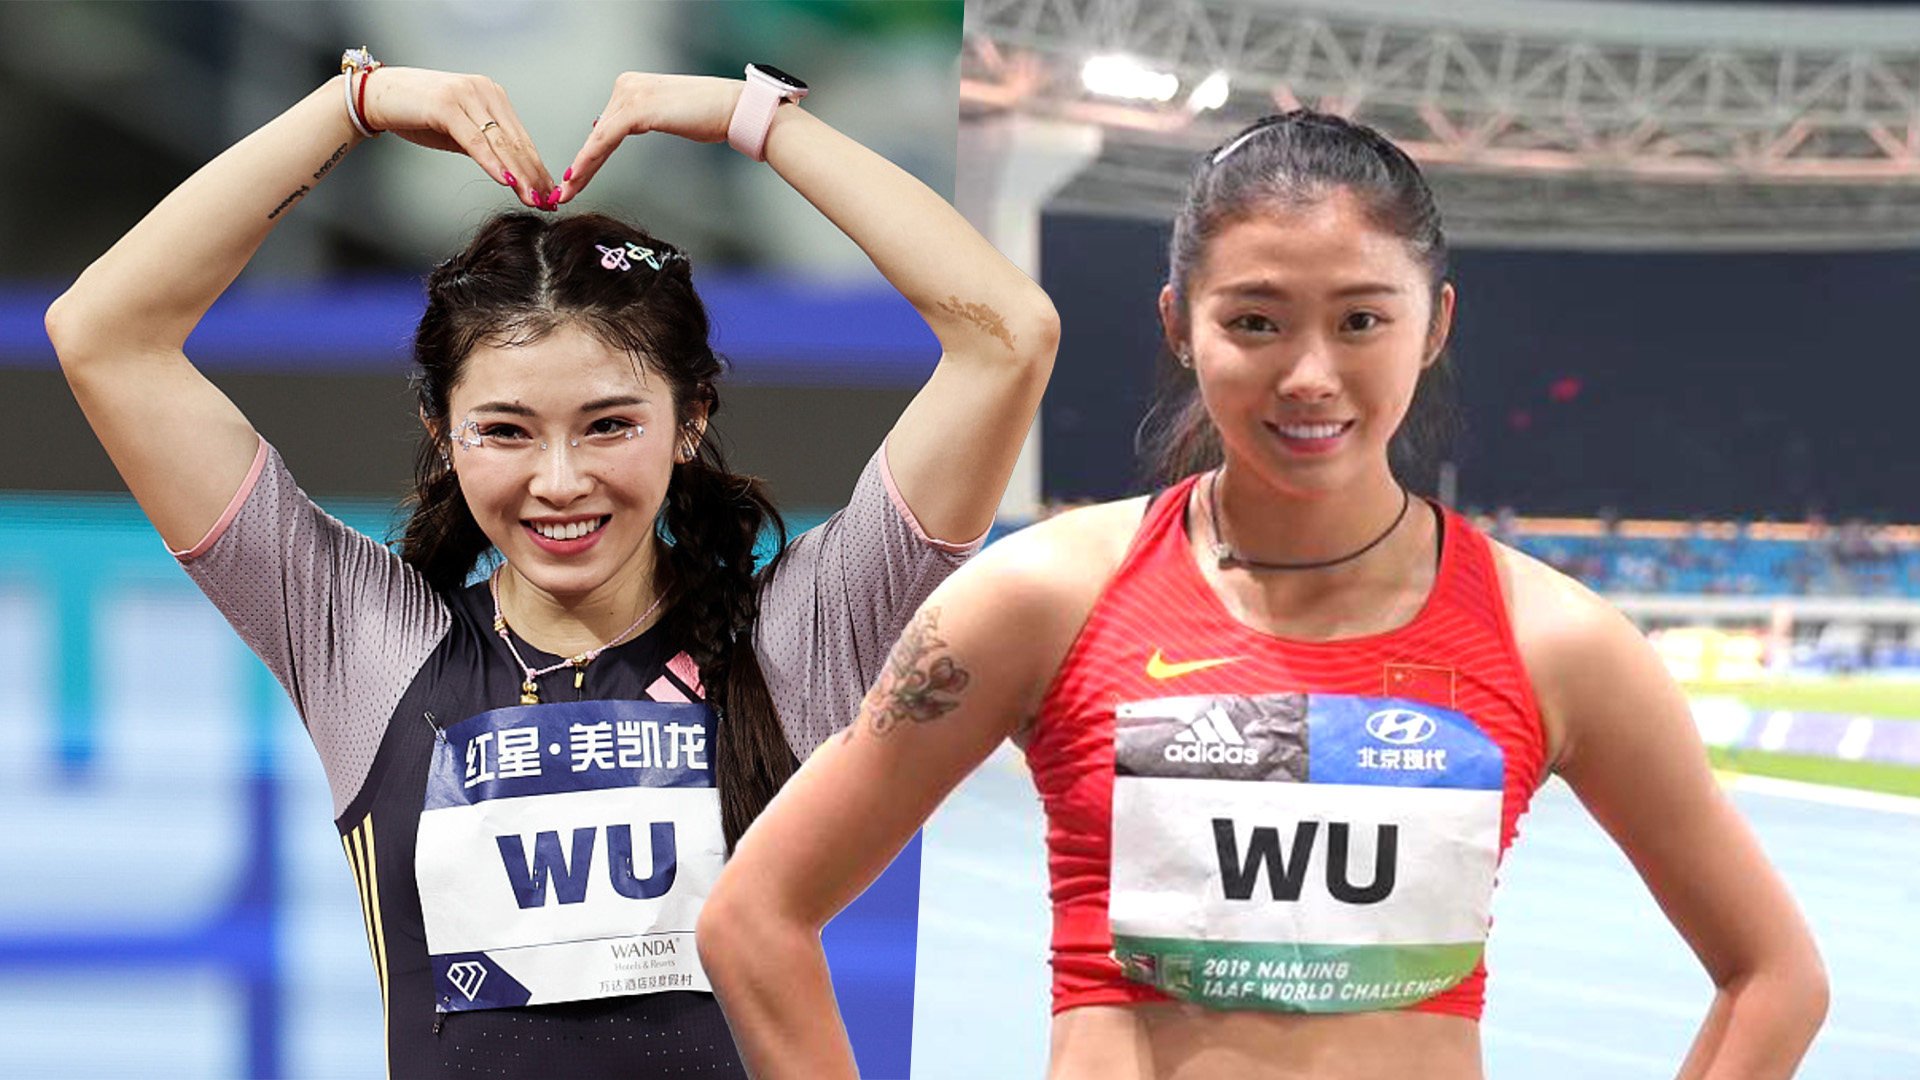 Wu Yanni, China’s controversial champion hurdler, has tattoos, opinions, and wears makeup during races. Now she hopes to shine at the Paris Olympics later this year. Photo: SCMP composite/Weibo/Sohu